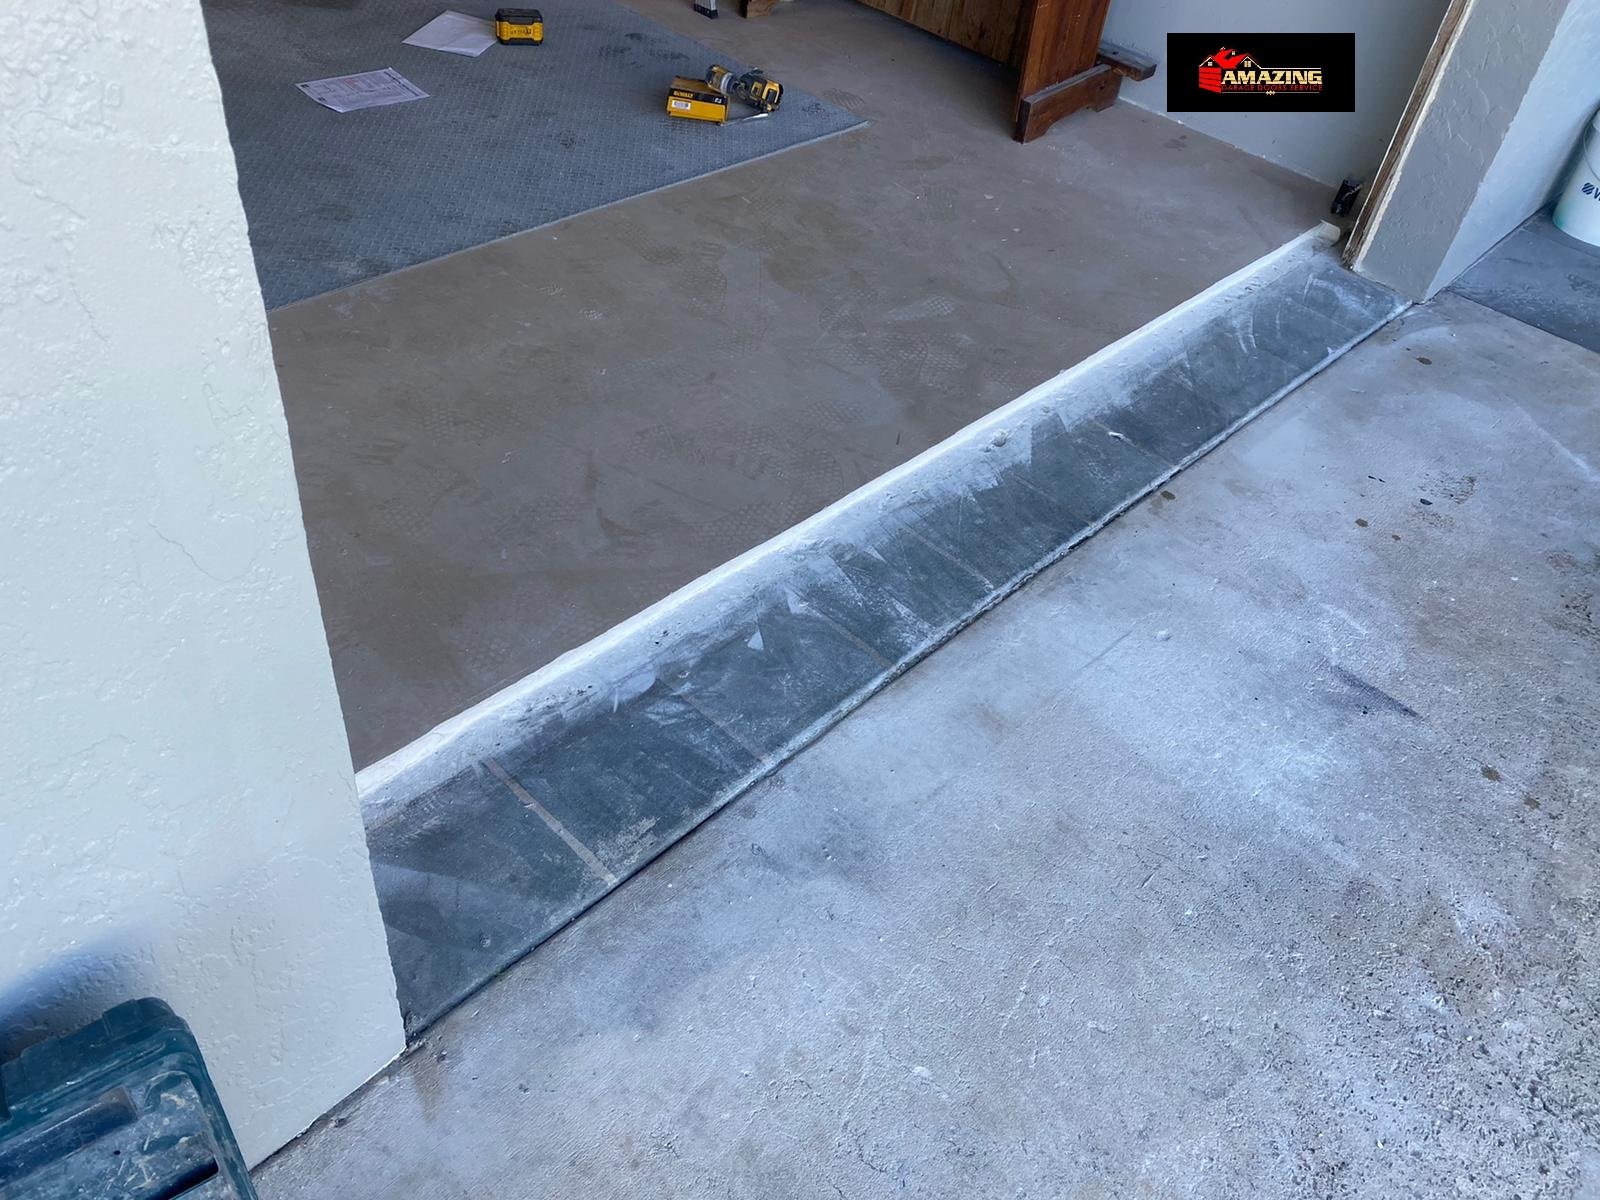 When the garage floor needs and gets cut